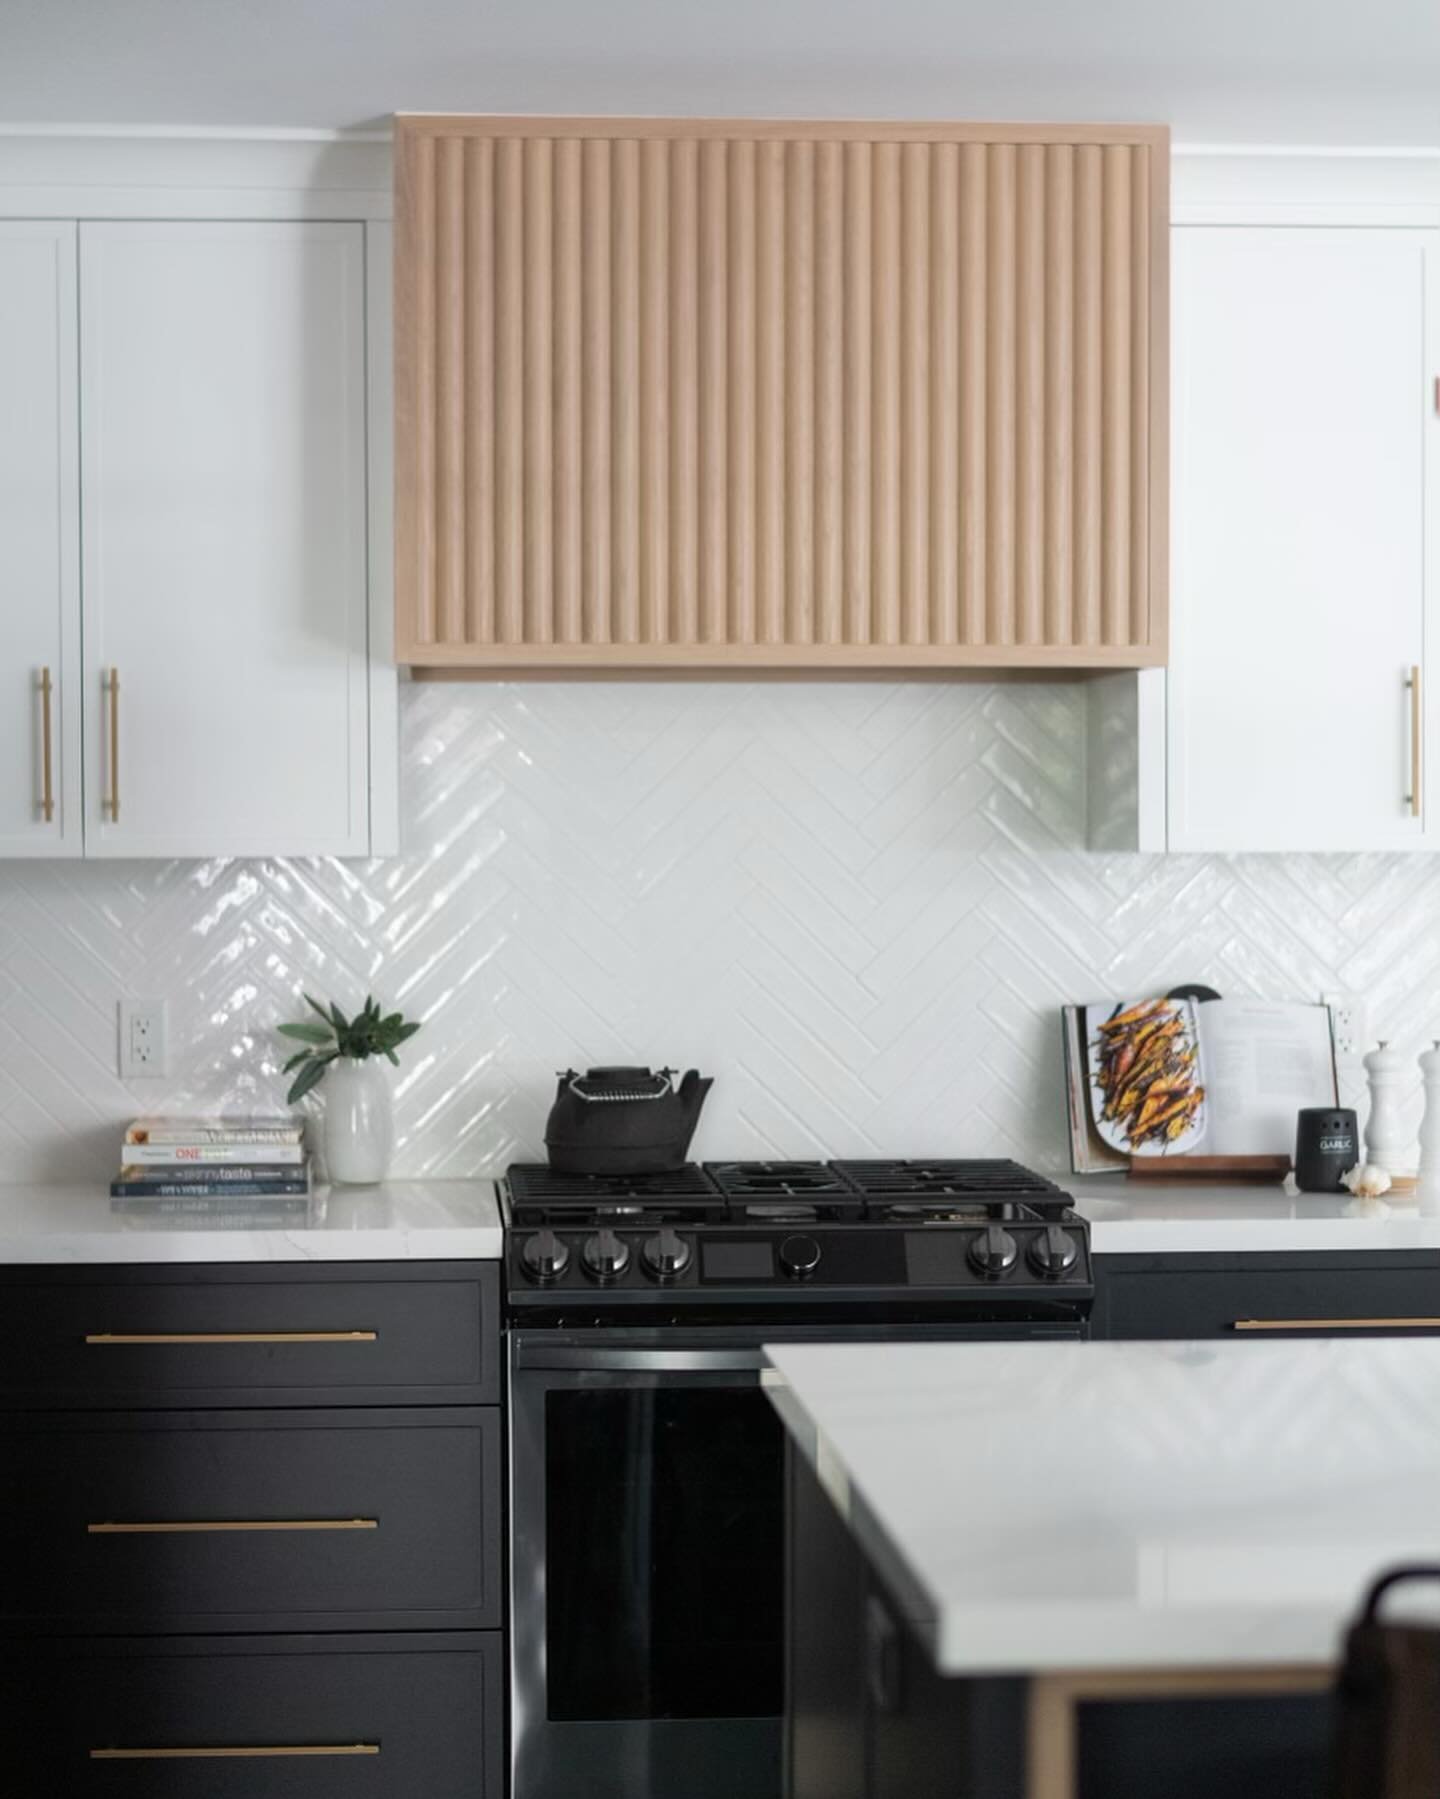 Embracing the charm of contrast with this kitchen reno: wood hood, sleek black base cabinets, and crisp white uppers. 🤍🖤

#kitchen #blackcabinets #whitecabinets #kitchenrenovation #loveyourspace